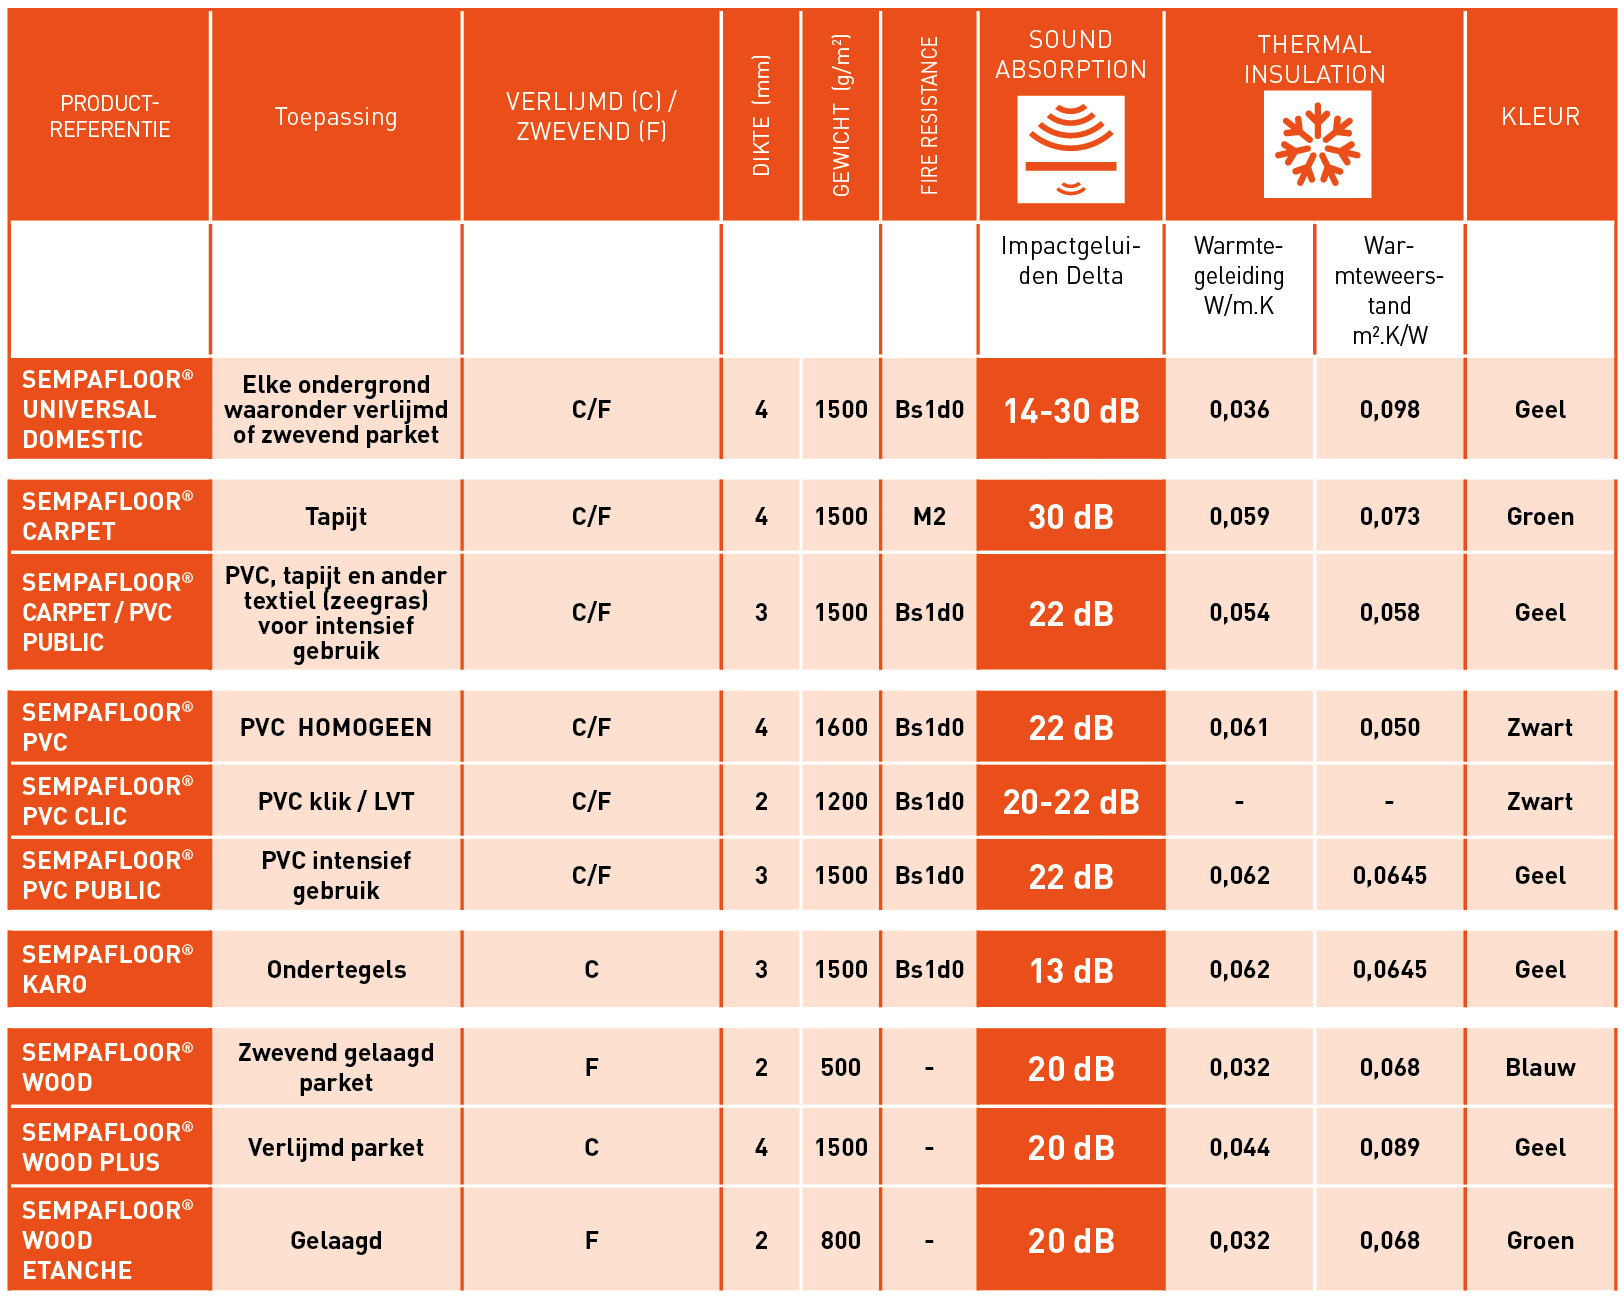 This table shows the main technical characteristics in terms of soundproofing and thermal insulation for products in the SempaFloor range.